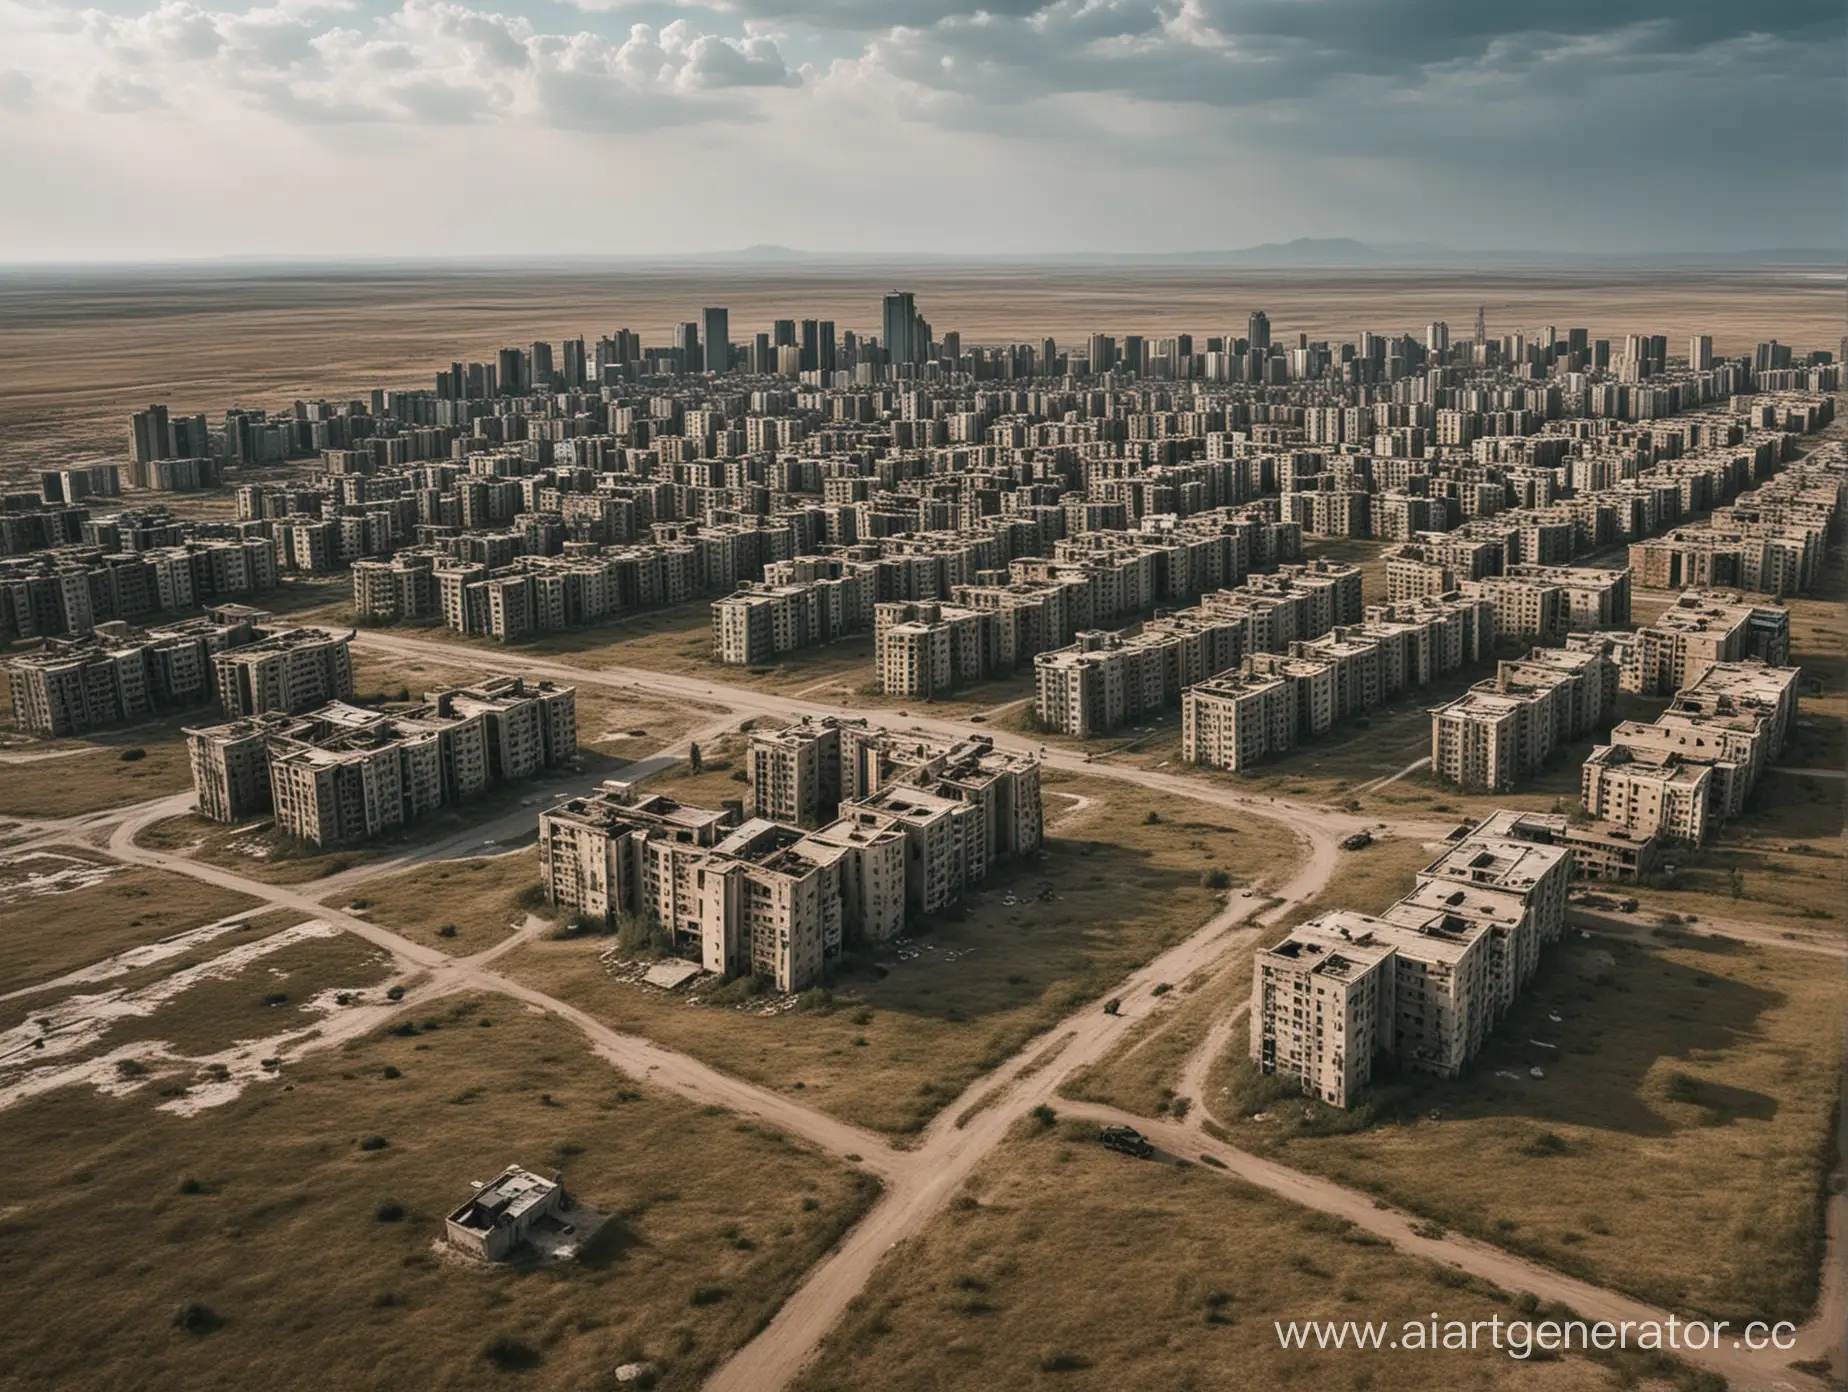 Post-apocalyptic city in the steppes of Kazakhstan